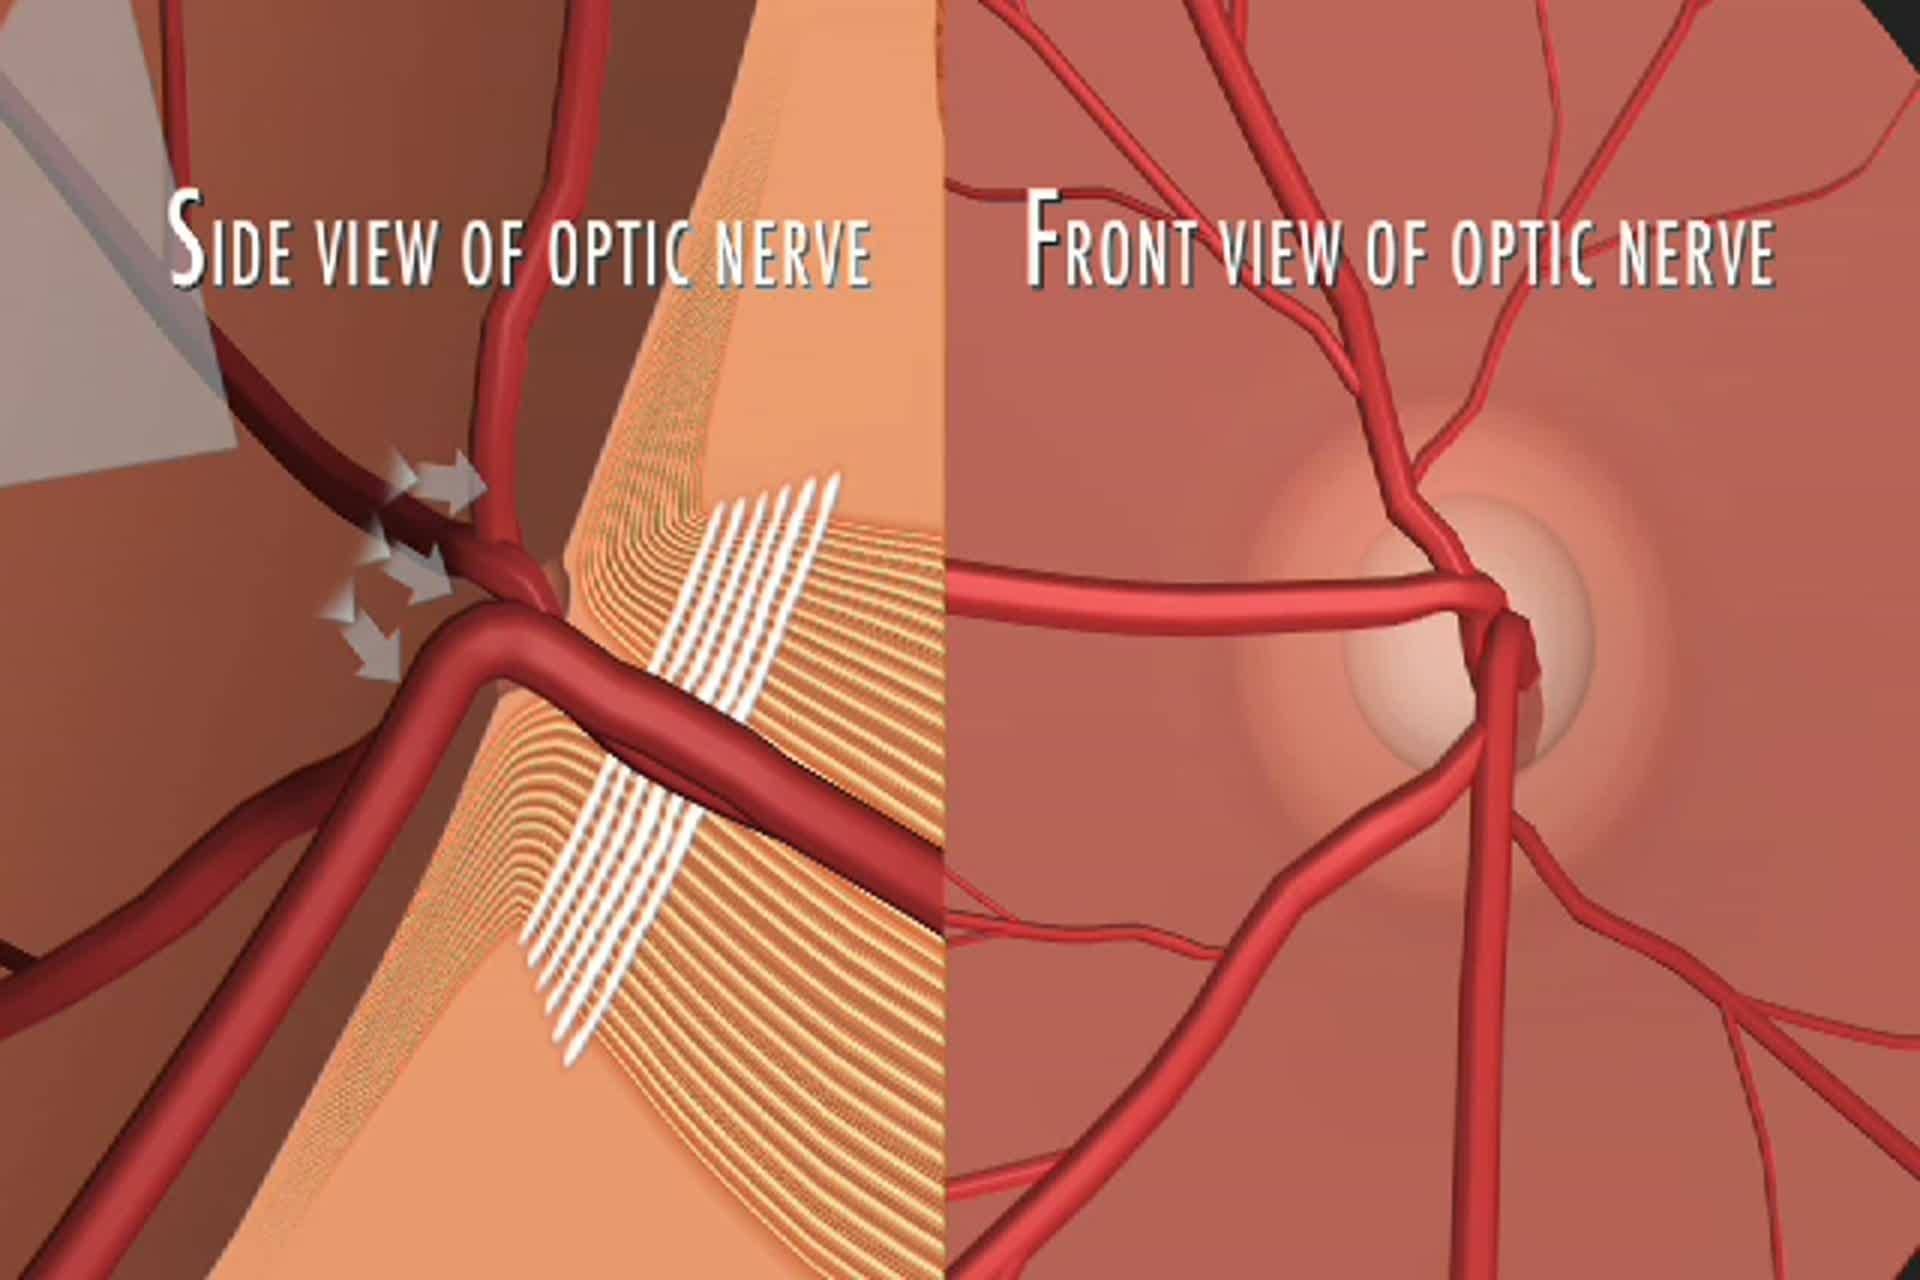 Glaucoma - What is optic nerve cupping from loss of nerve fibers?